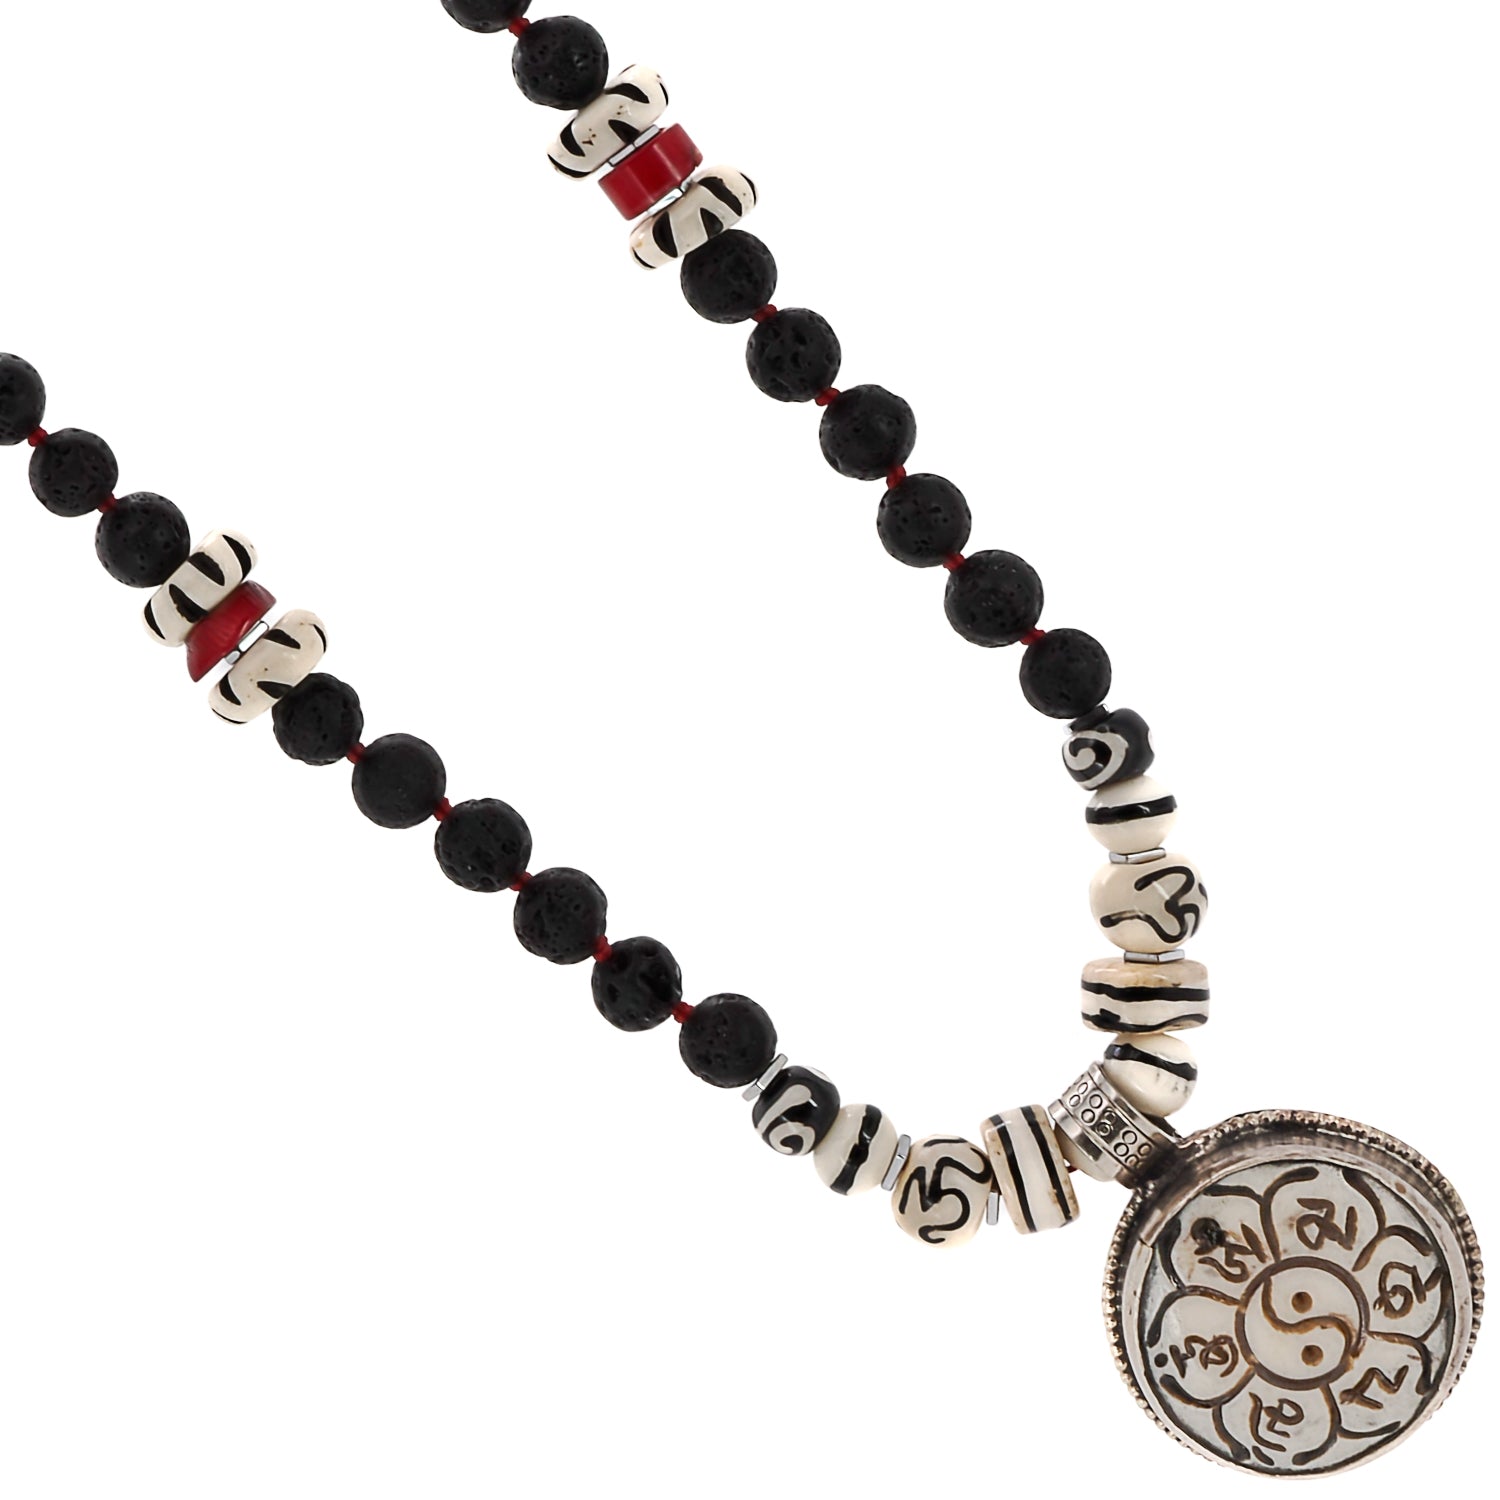 Yin Yang Balance Necklace, a meaningful piece of jewelry crafted with Nepal beads and a symbolic Yin Yang pendant.